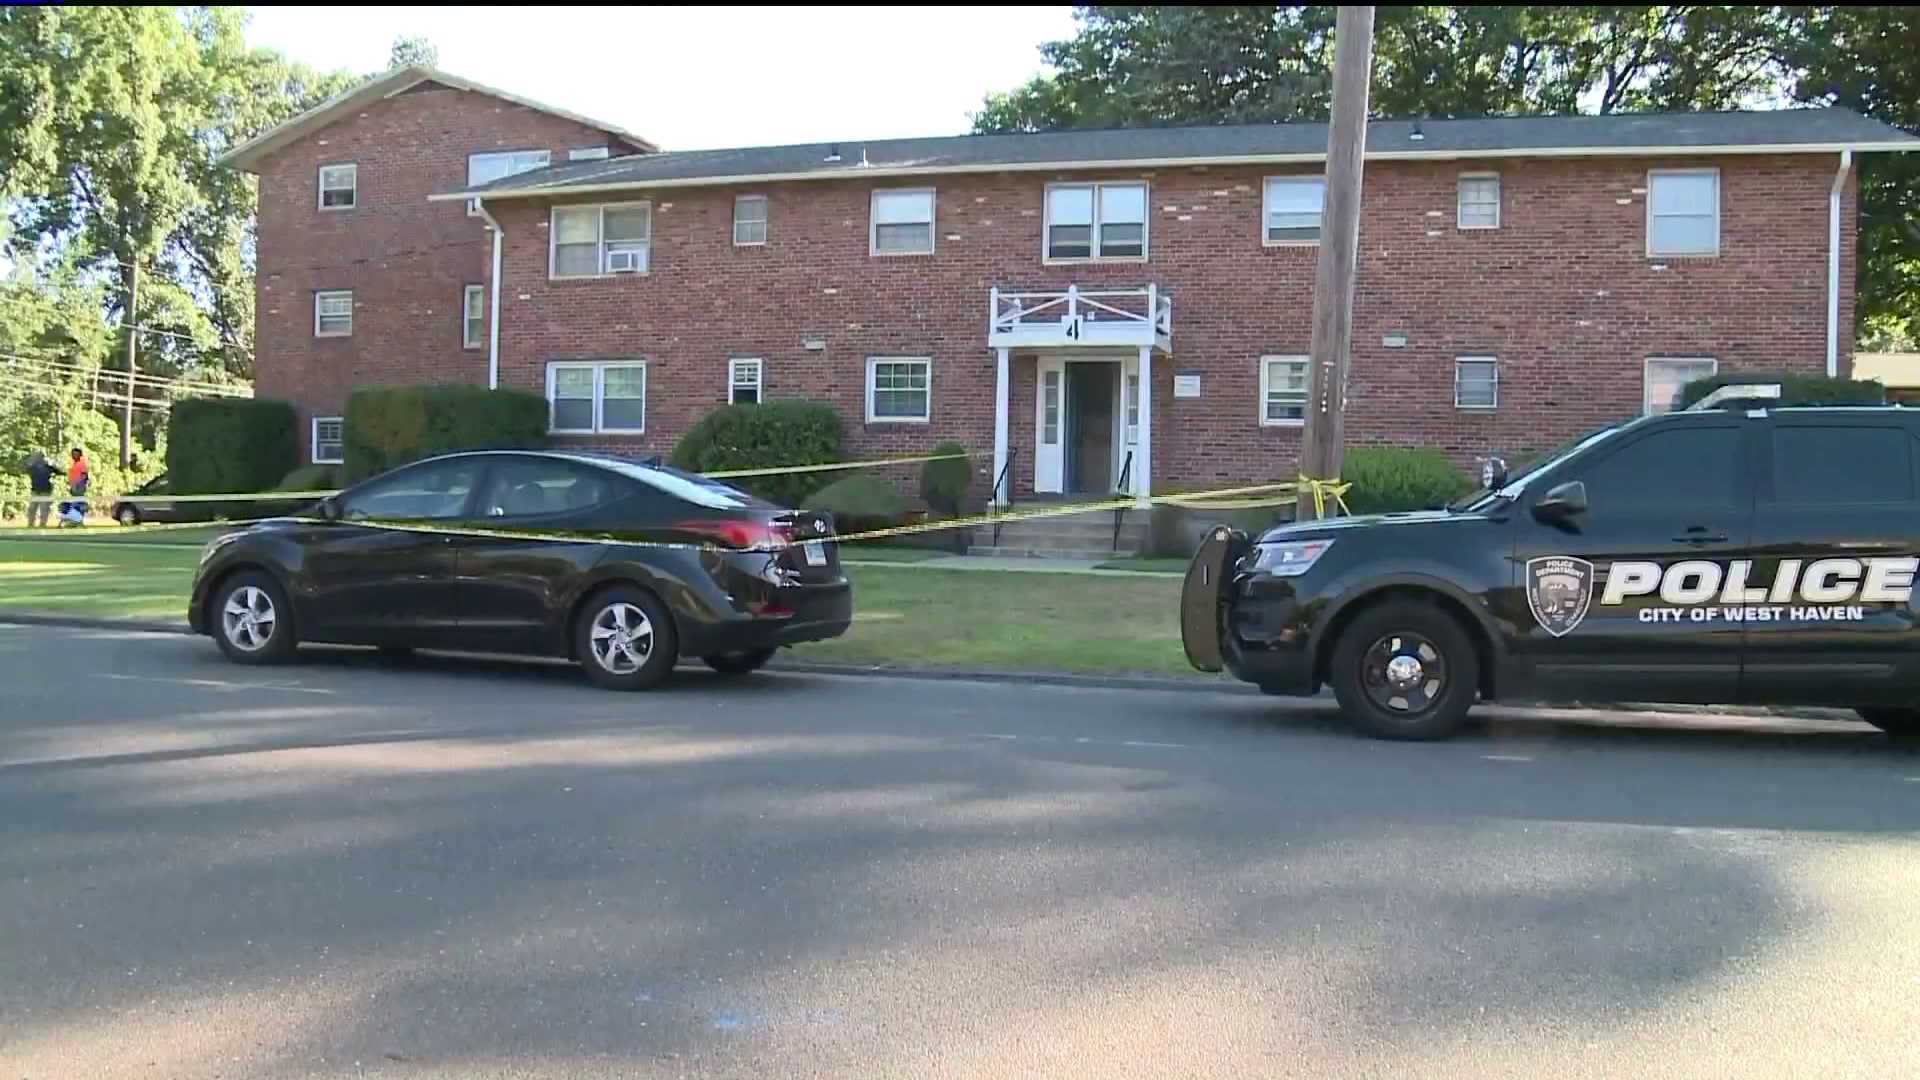 2-year-old found in hot car in West Haven expected to survive